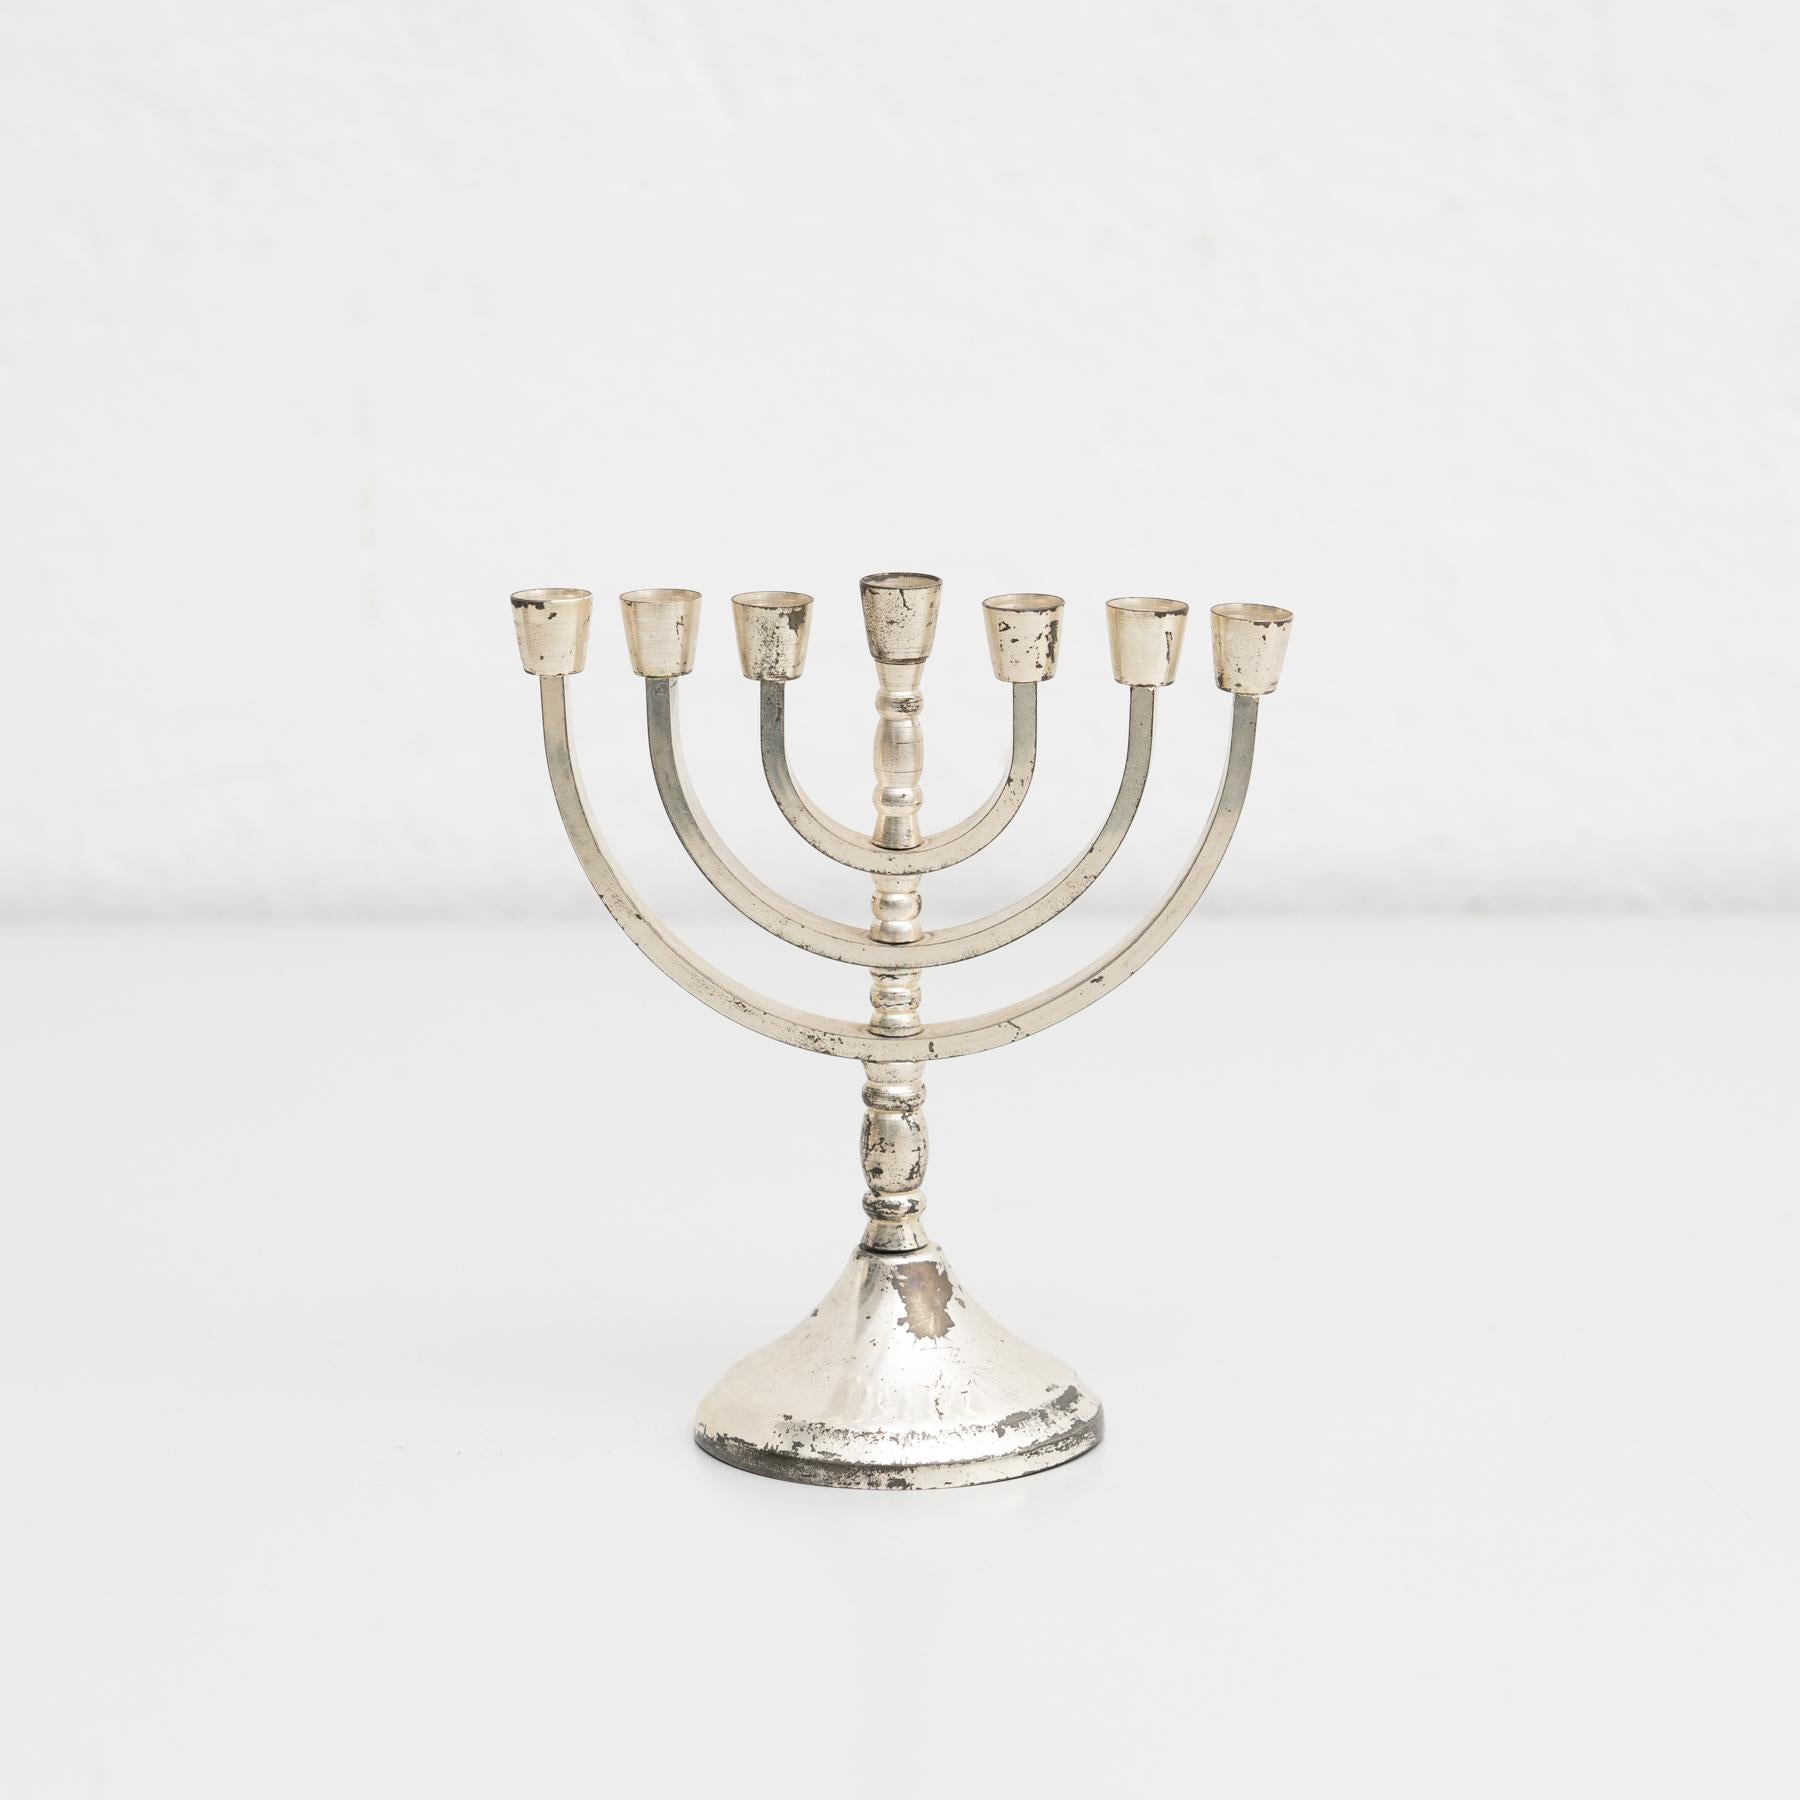 Antique traditional menorah silver candle holder with seven branches. It is used to celebrate, remember, and honor the historical miracle of Hanukkah.

By unknown manufacturer in Jerusalem, circa 1950.

In original condition, with minor wear